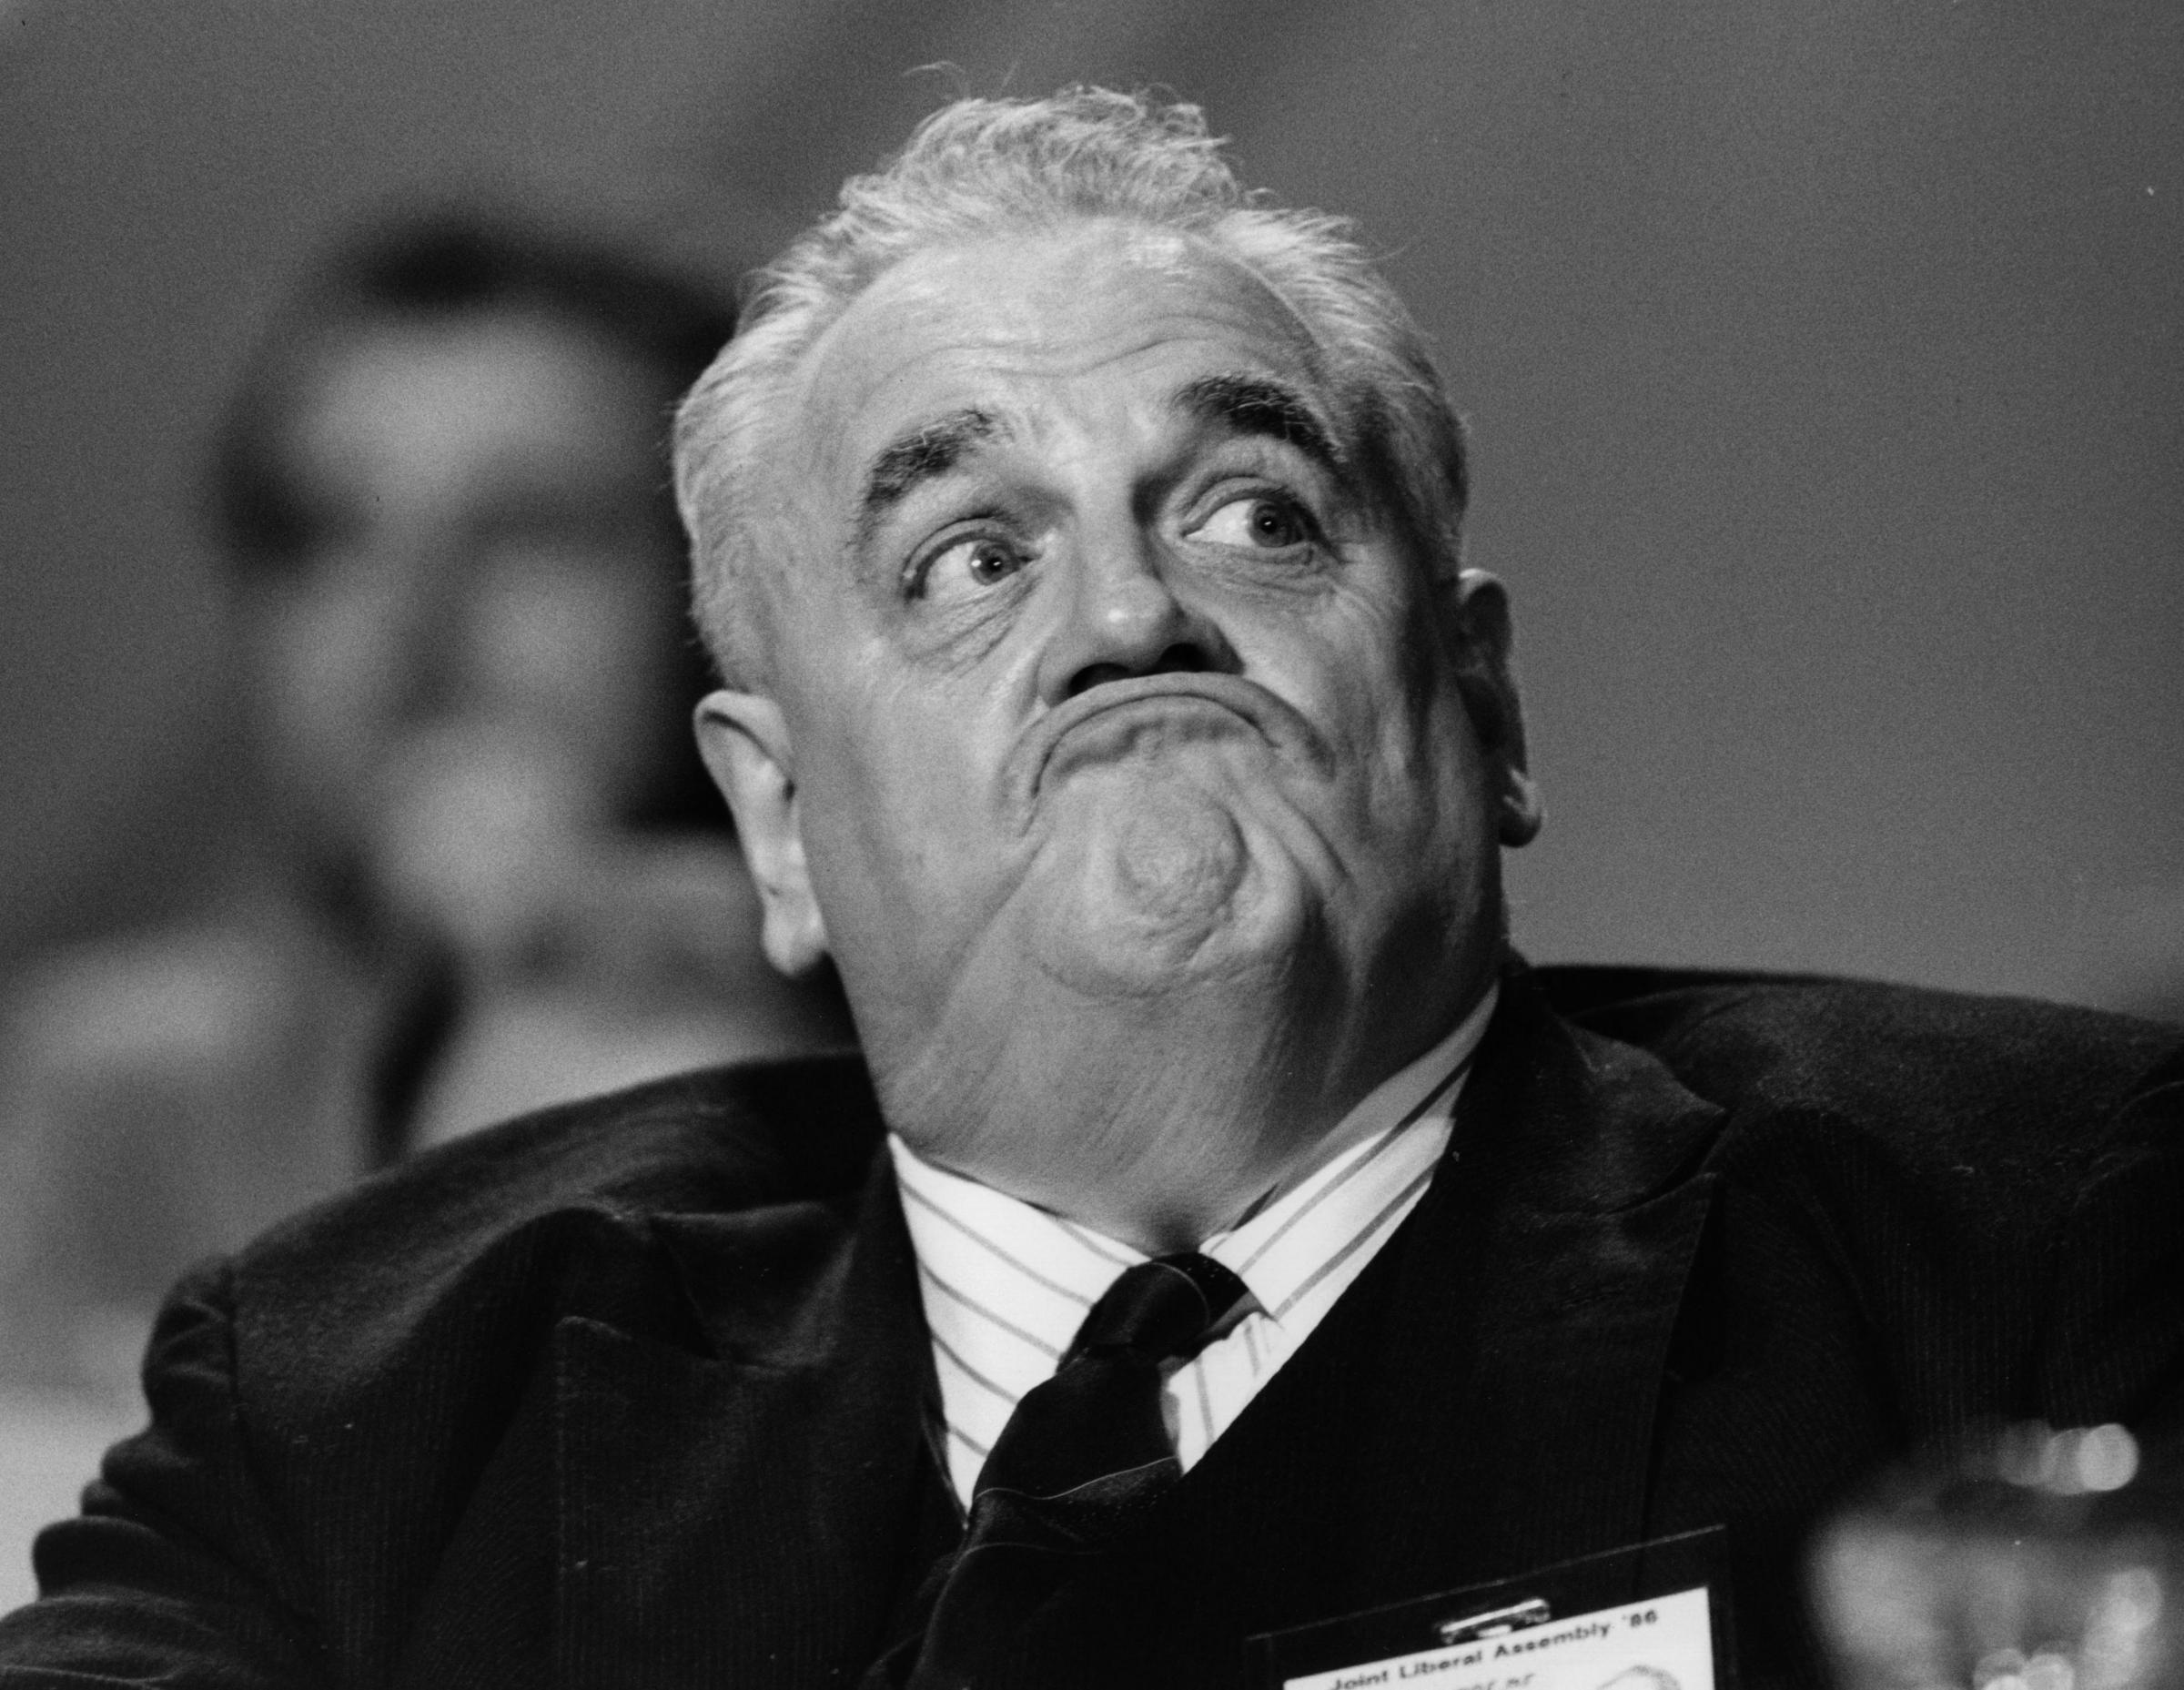 FILE - September 1986:  A portrait of Cyril Smith, MP, at the Liberal Party Conference. Sir Cyril Smith has died, September 3, 2010 aged 82  (Photo by Keystone/Getty Images) (33160924)